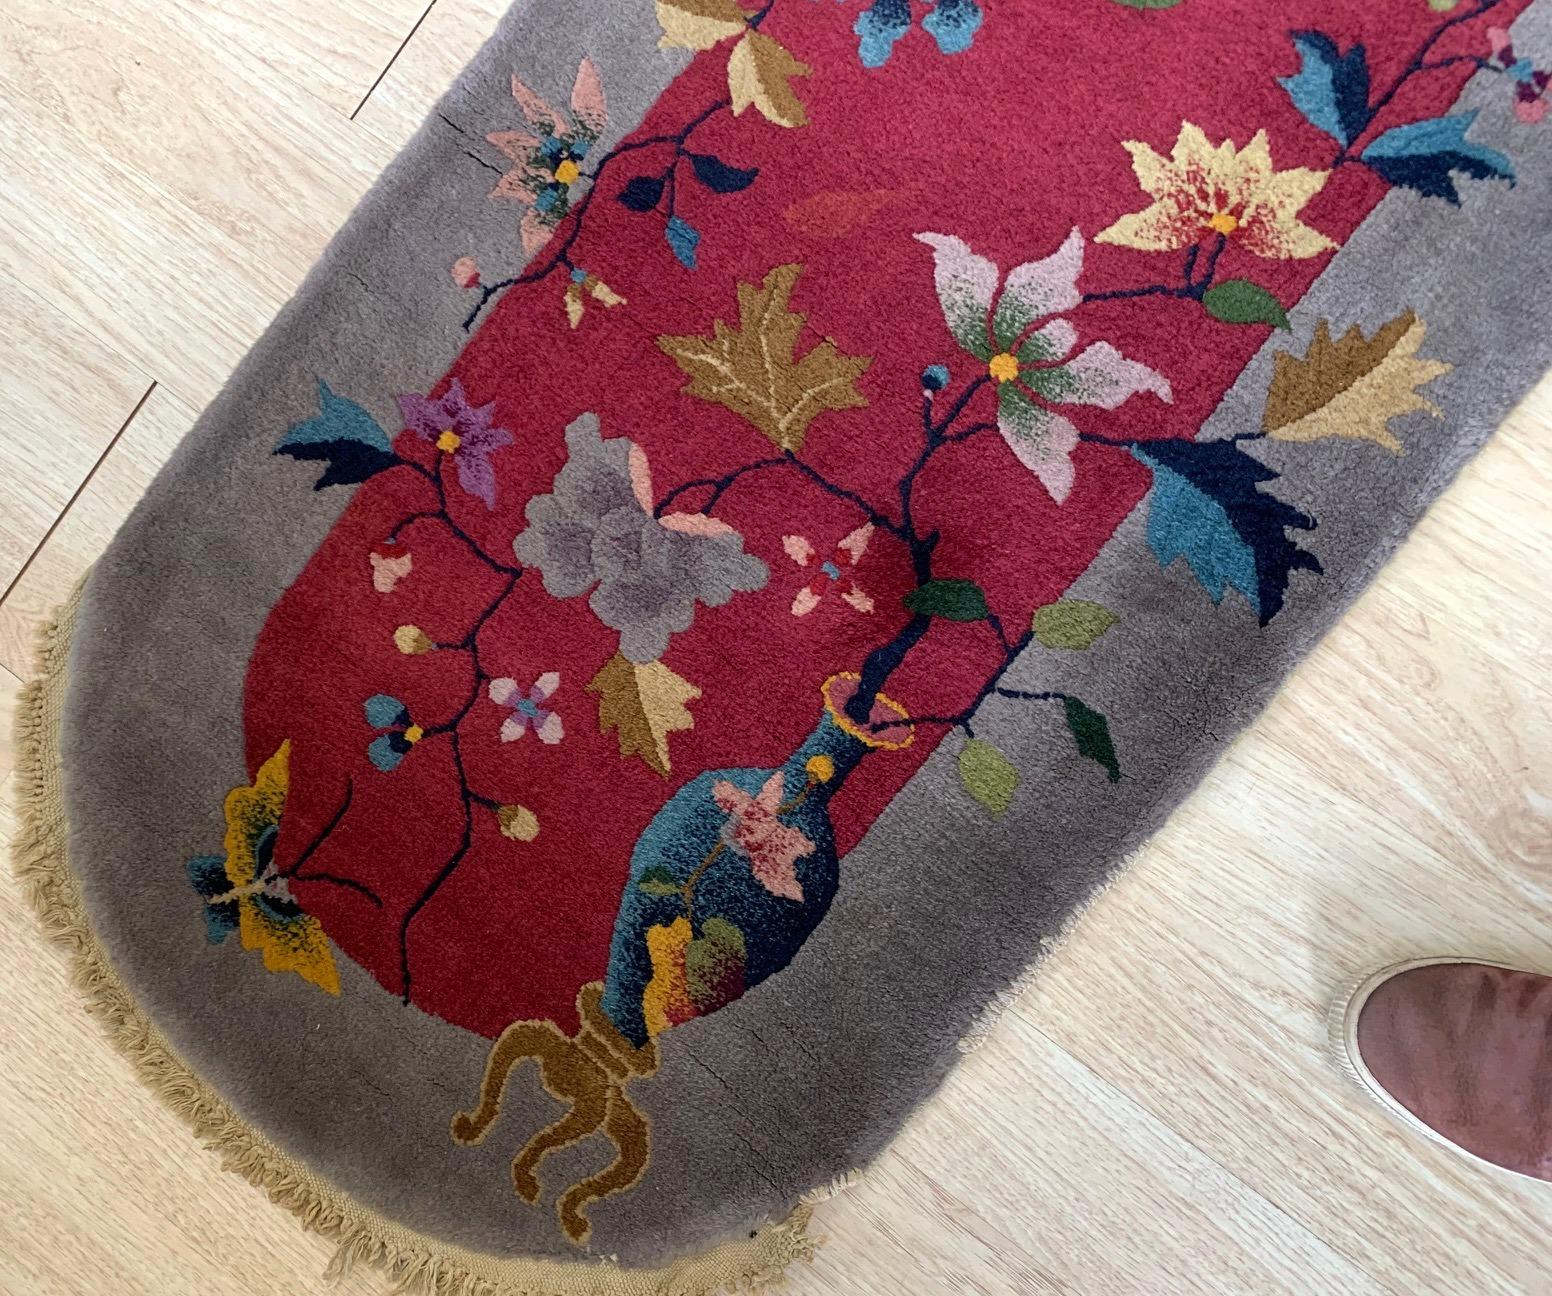 Handmade antique Art Deco Chinese oval rug in original good condition. The rug is from the beginning of 20th century.

-condition: original good,

-circa: 1920s,

-size: 2.1' x 3.10' (64cm x 120cm)?,

-material: wool,

-country of origin: